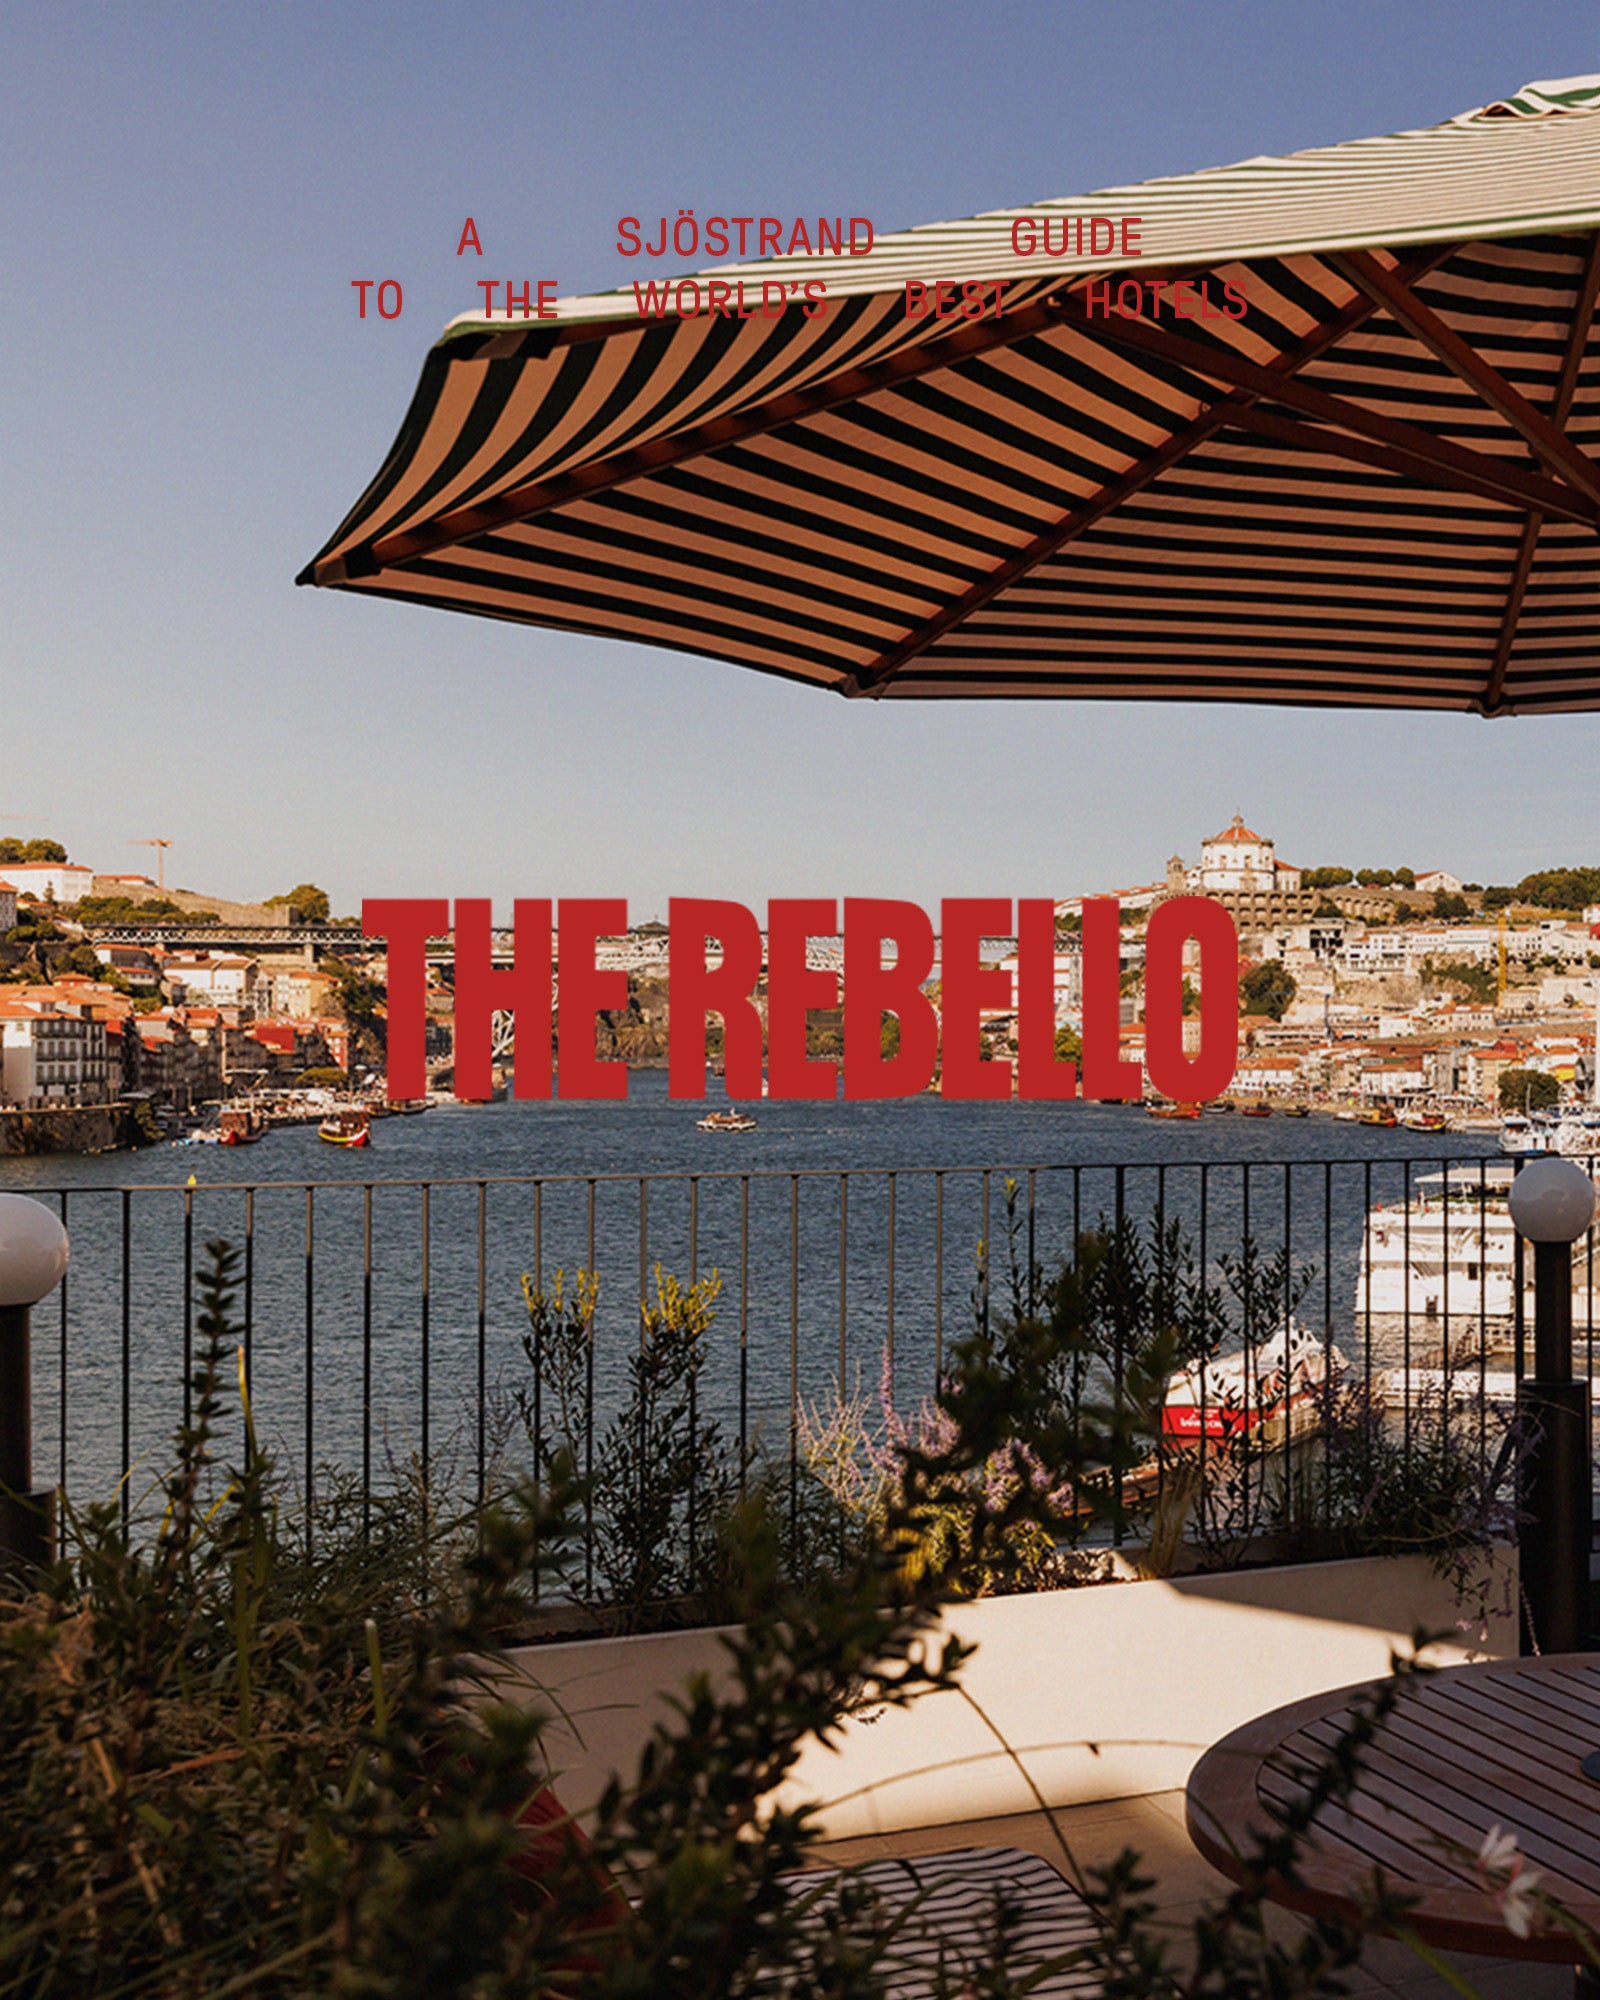 The Rebello - A grateful ode to 20th century industry of Porto card image